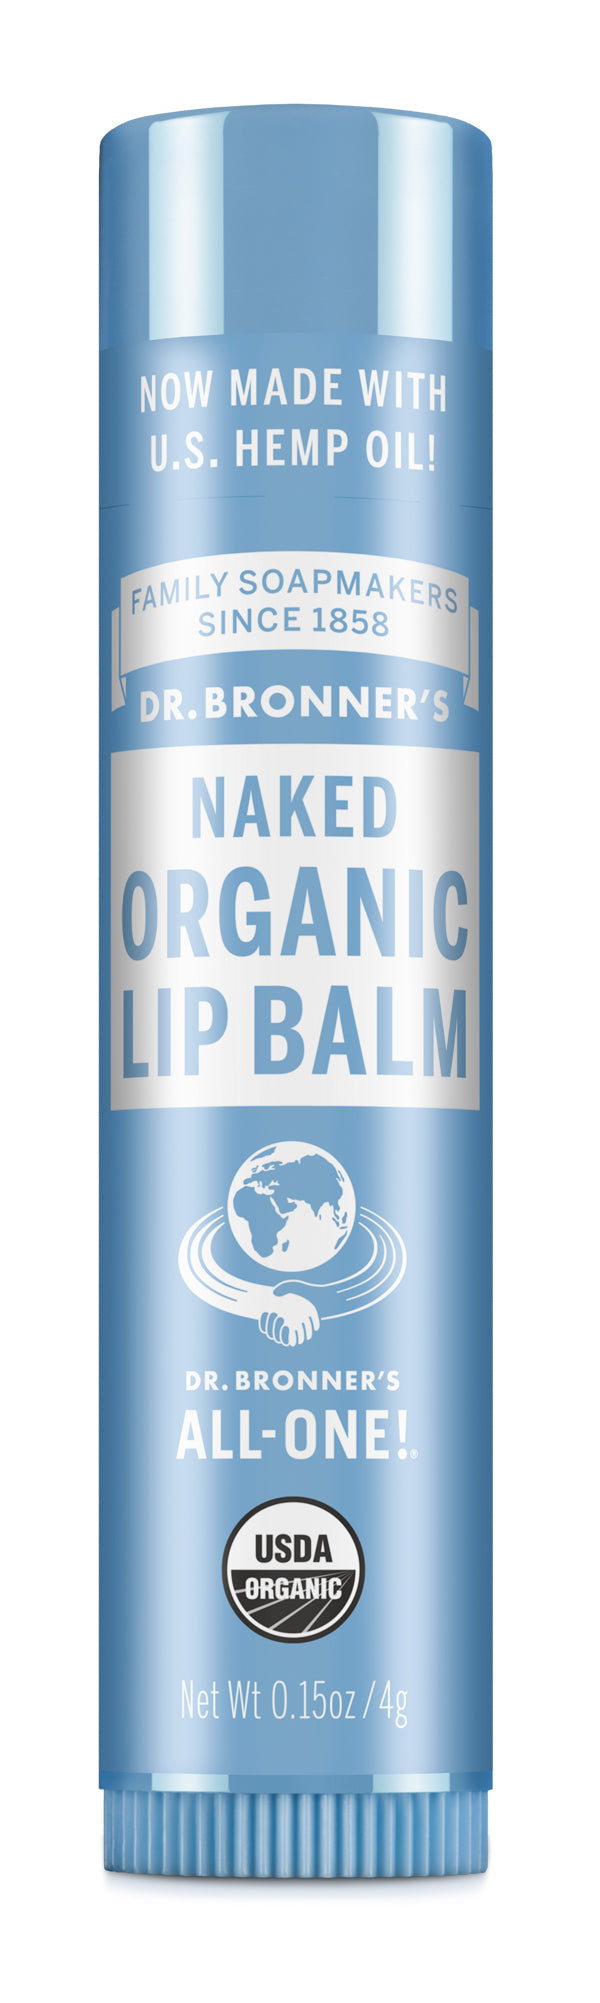 Naked - Organic Lip Balms - .15 oz - ProCare Outlet by Dr Bronner's